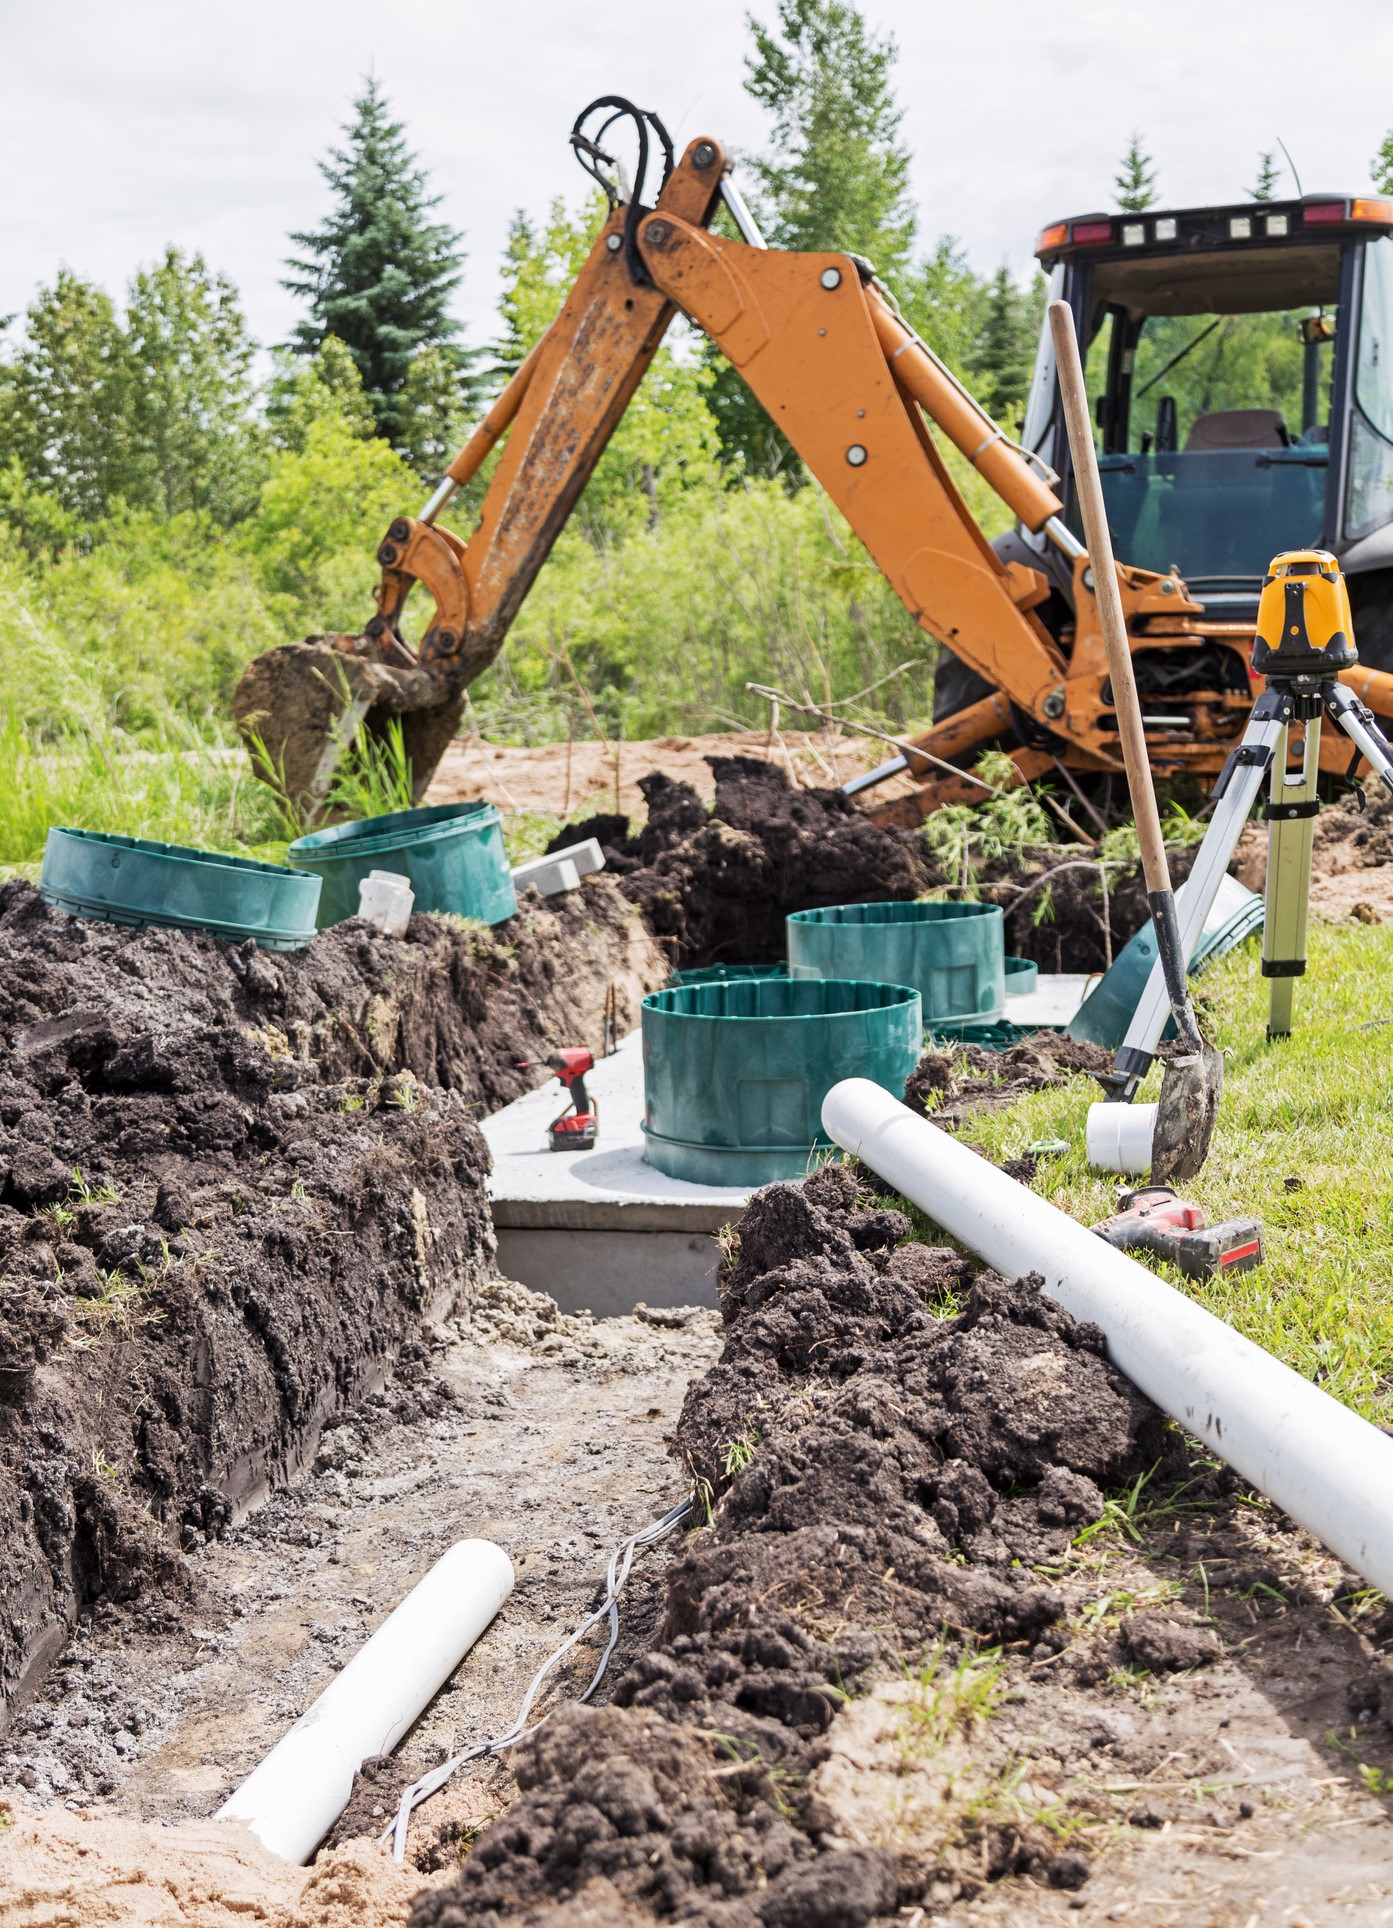 Scene of a construction site installing a new mound septic system.